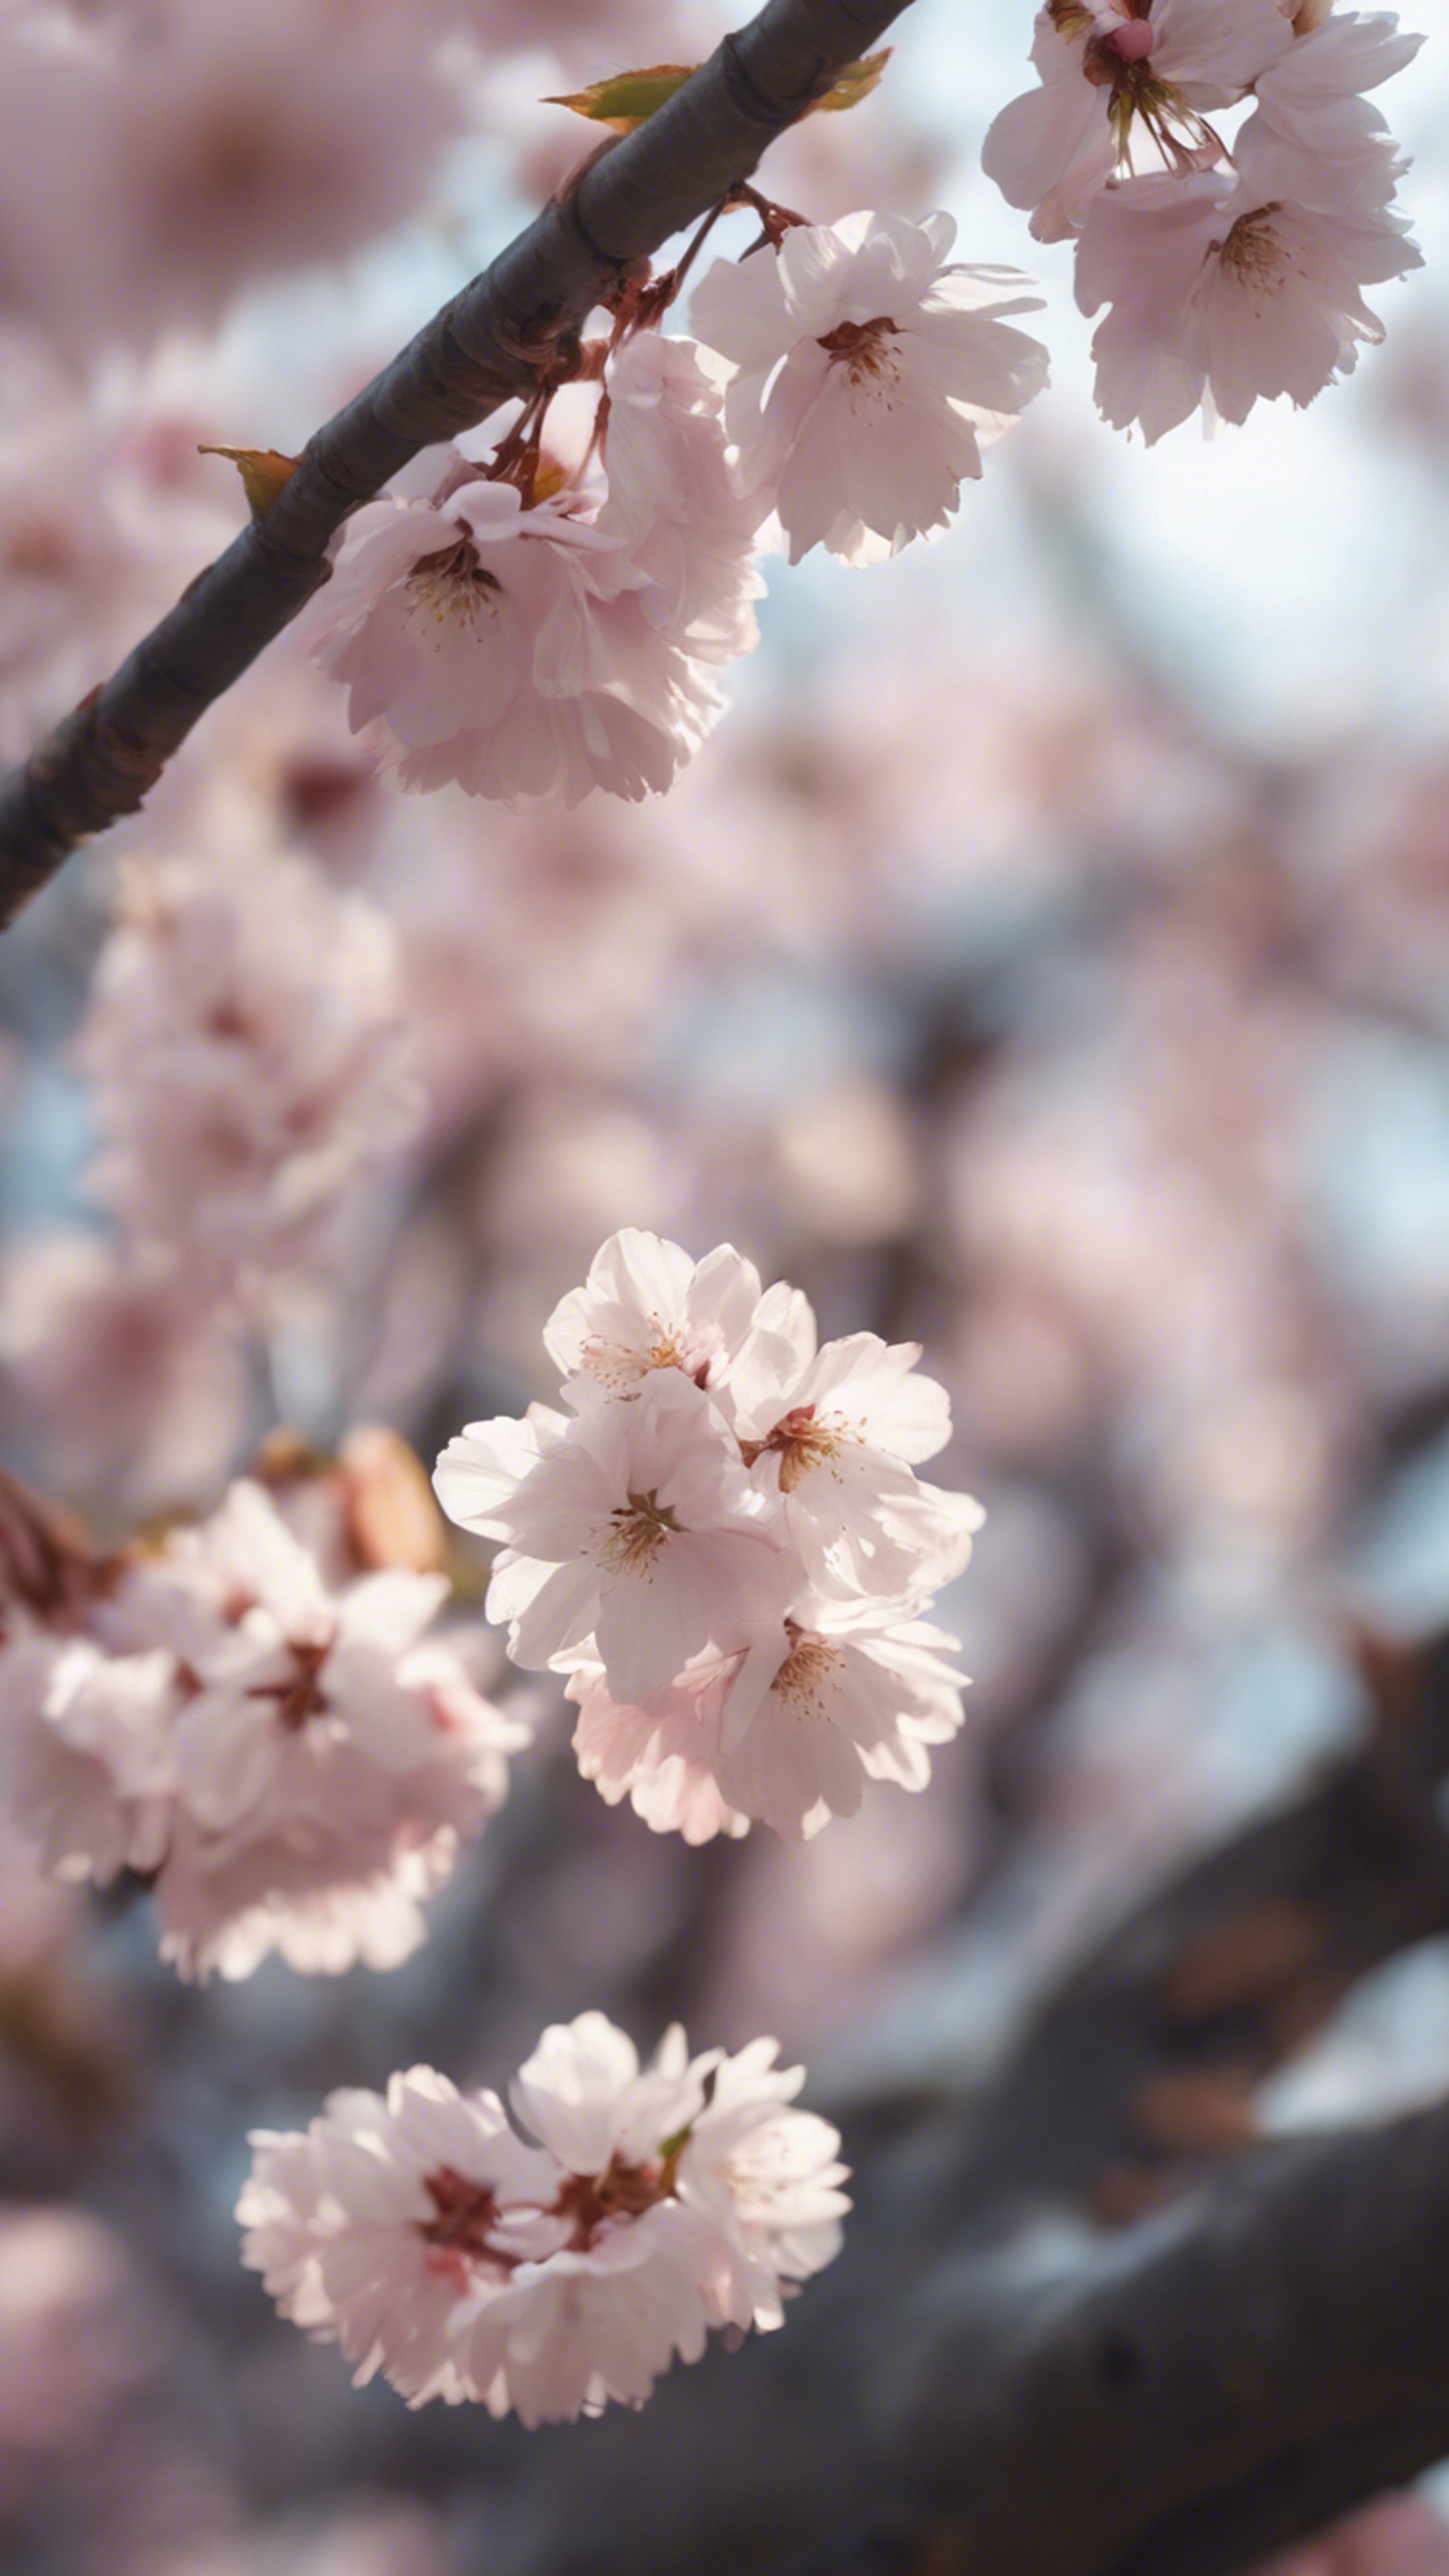 A close-up view of cherry blossom petals falling gently from the tree. Wallpaper[73cf20157d554b6991b4]